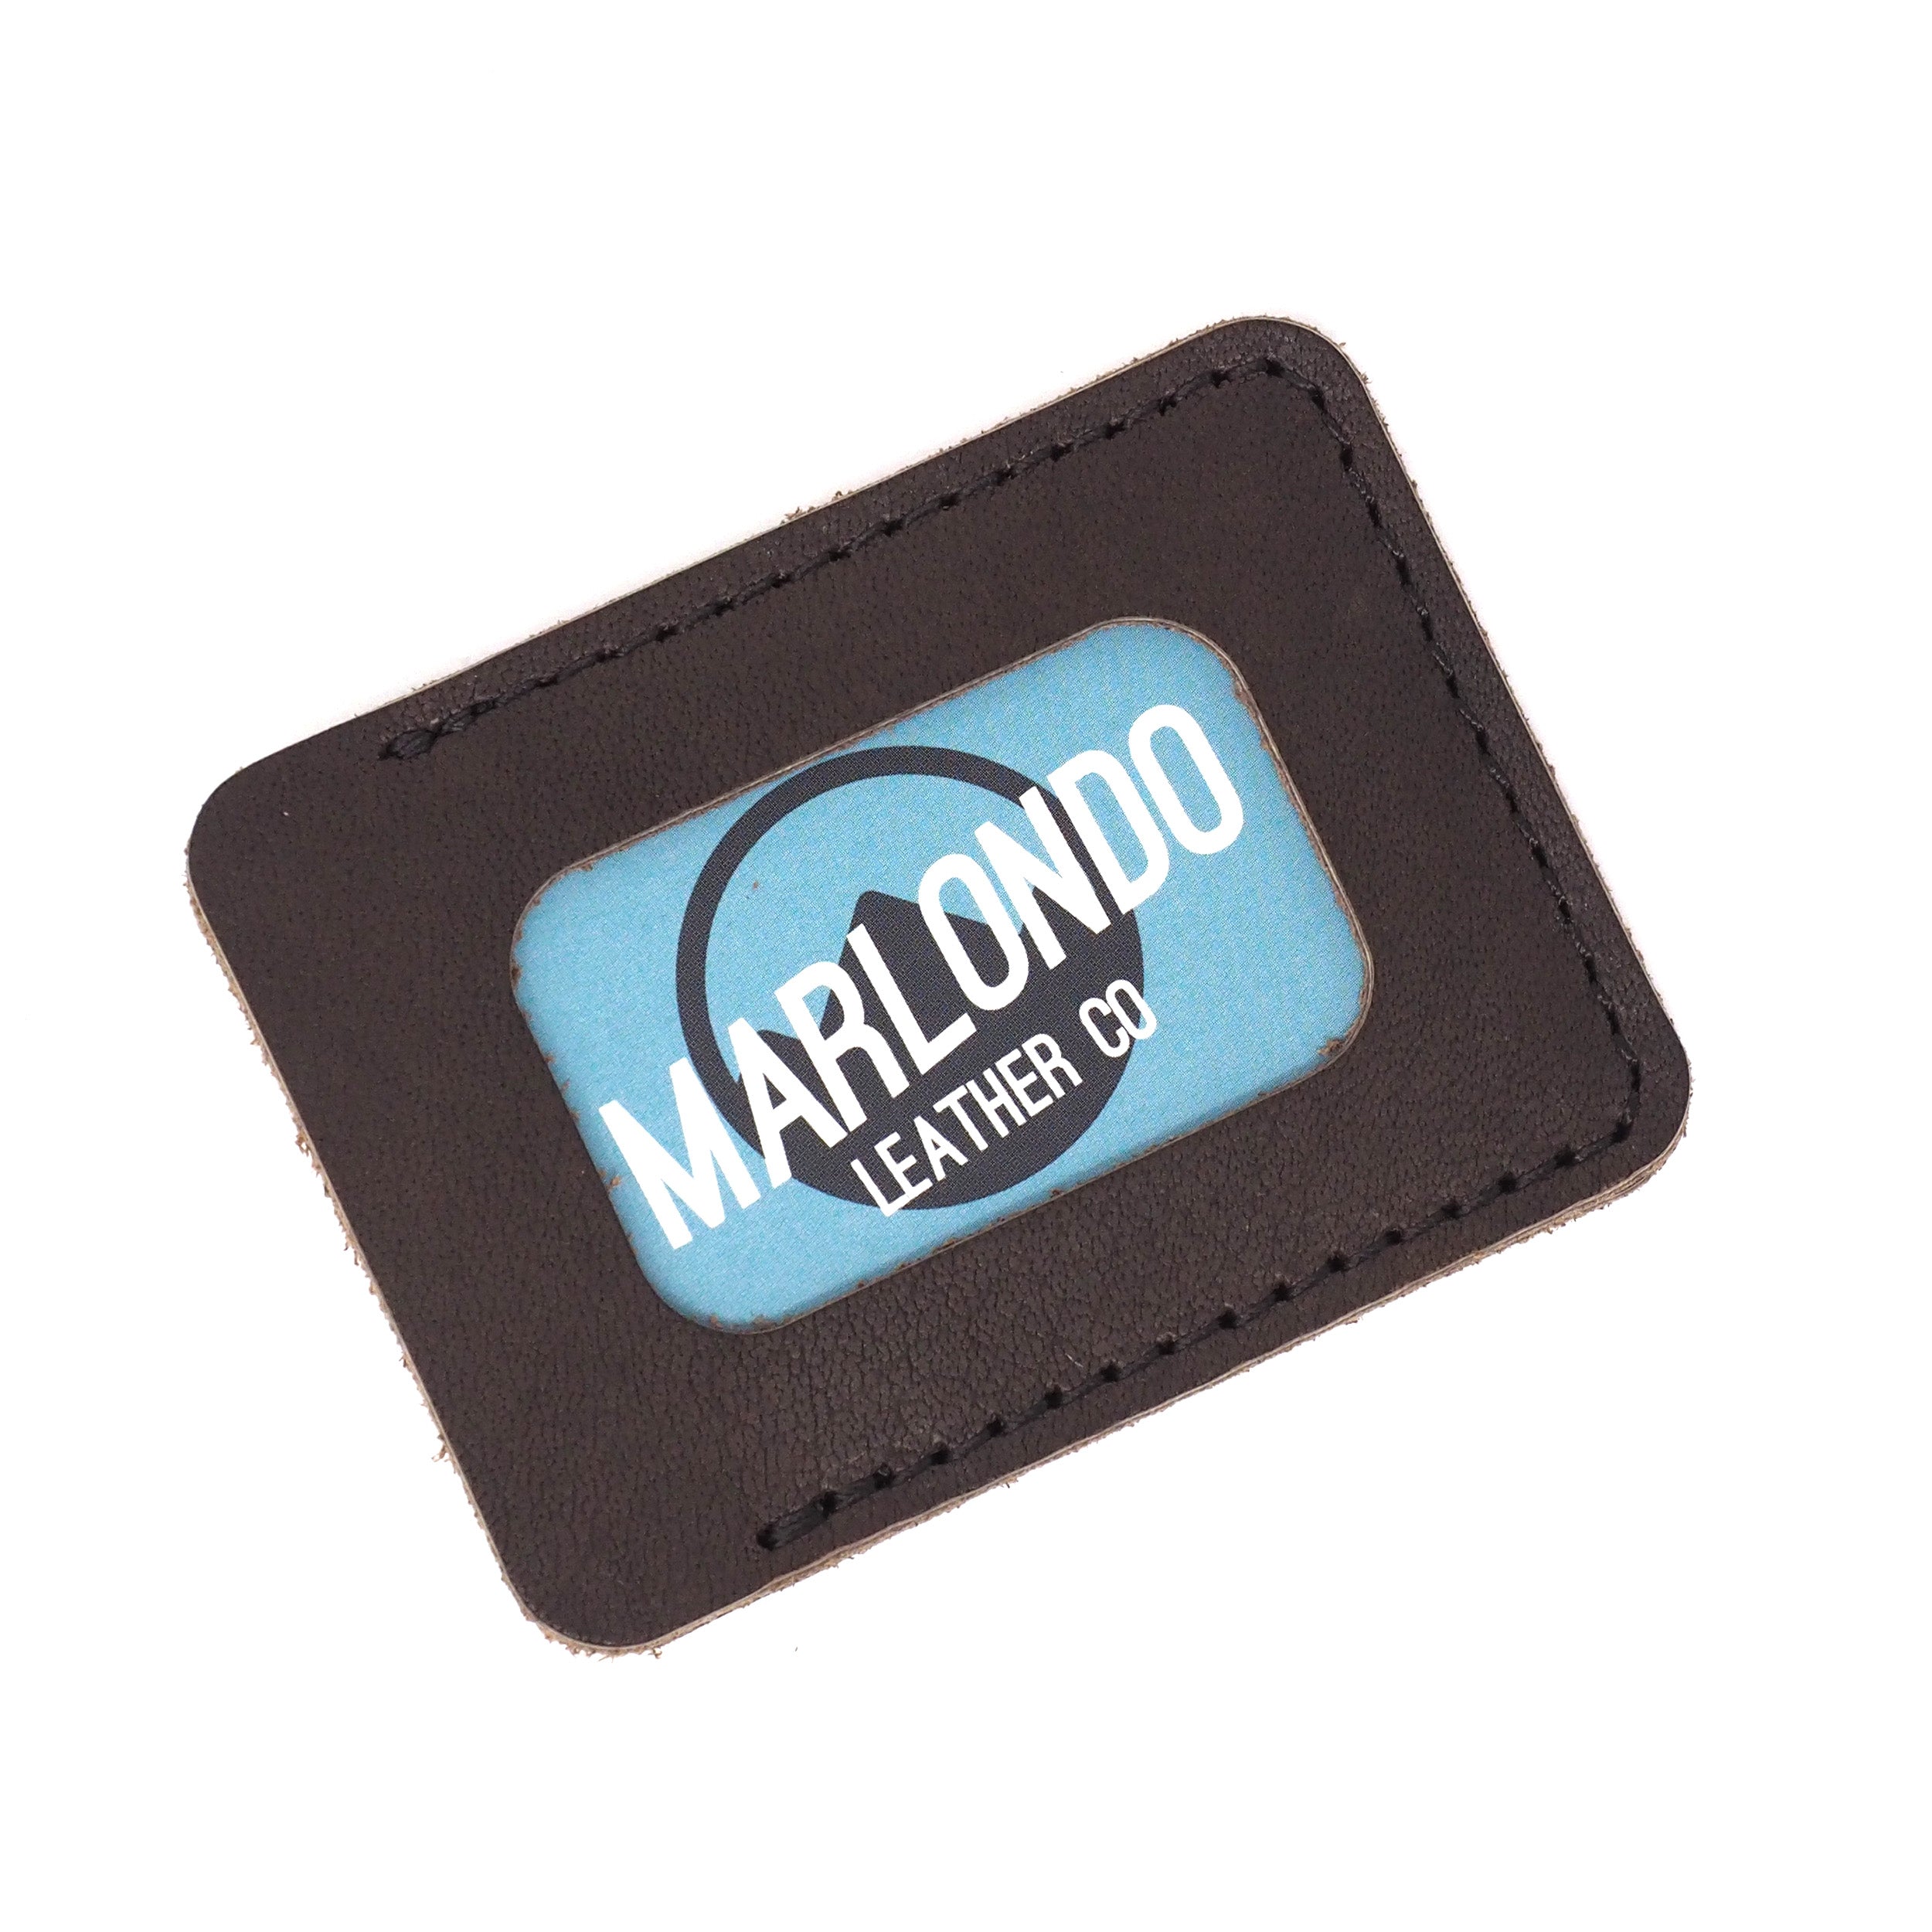 Double Card Wallet – Marlondo Leather Co.